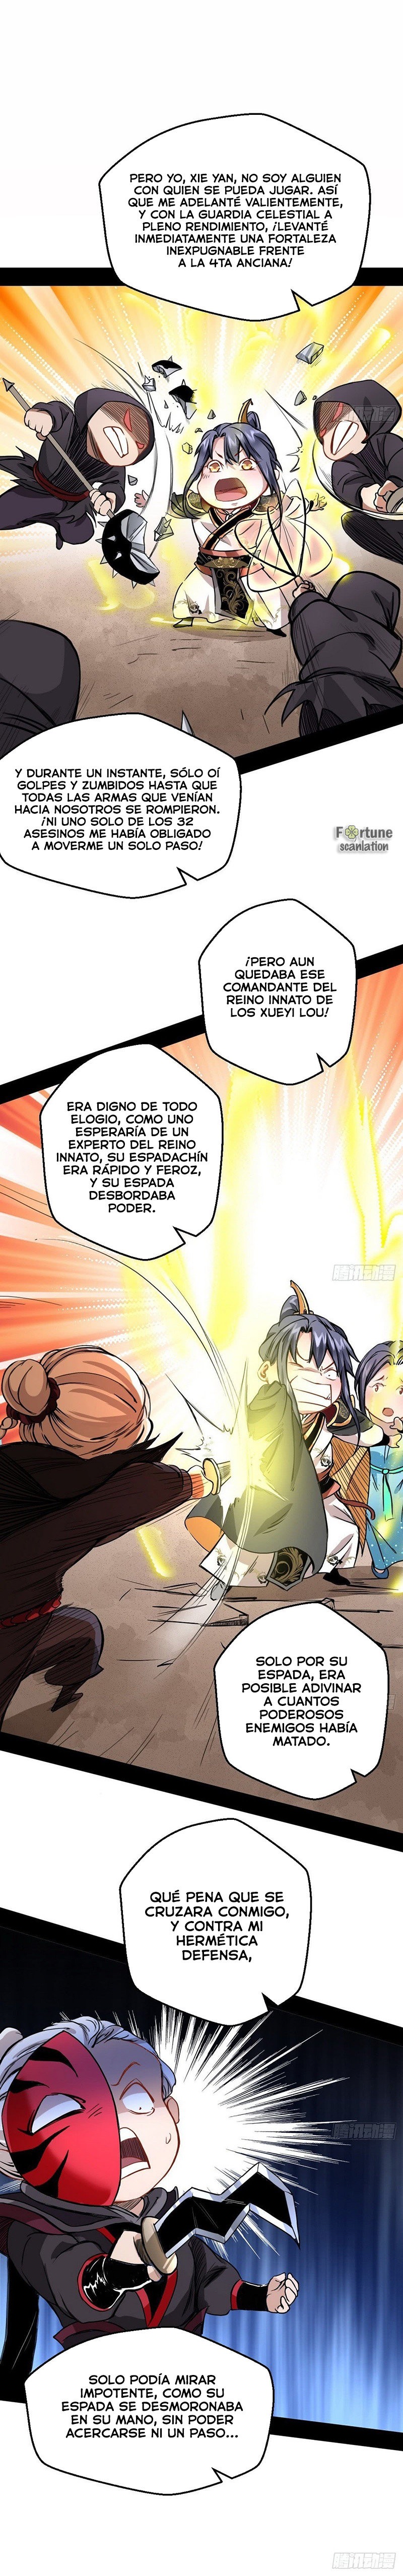 Manga Soy un dios maligno Chapter 40 image number 3